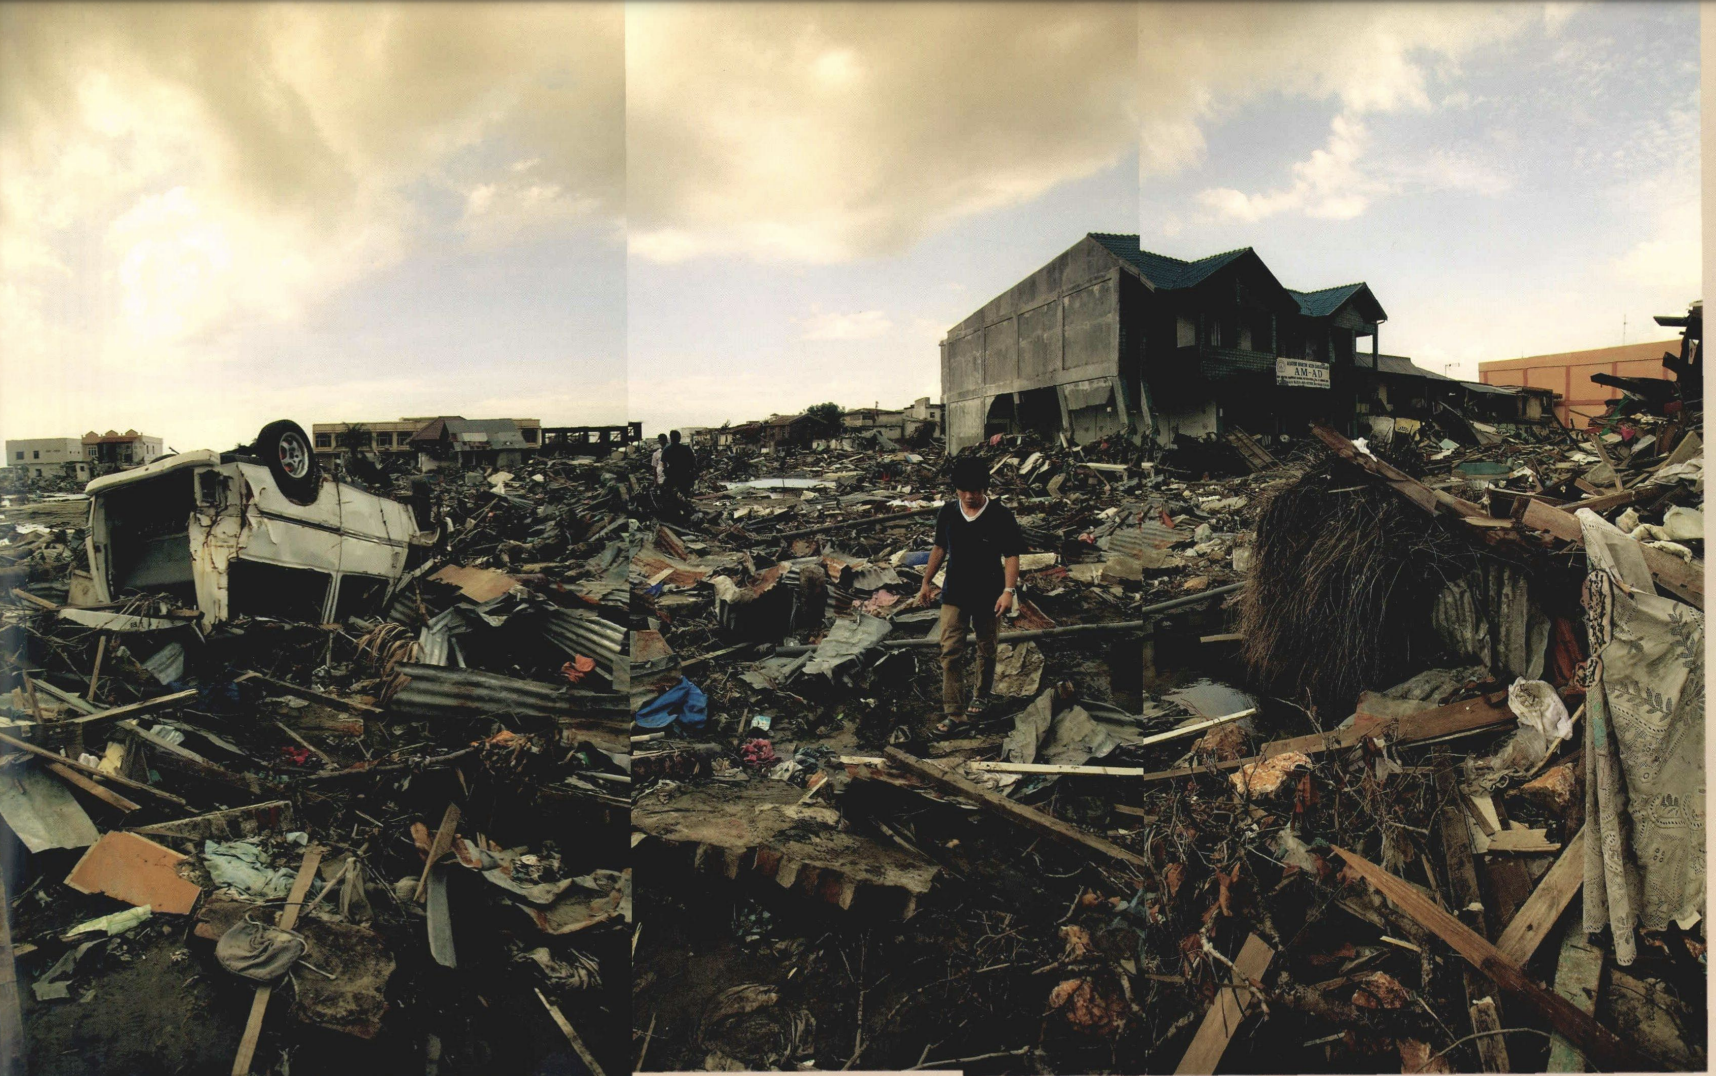 Several images stitched together show wreckage of what used to be a home.